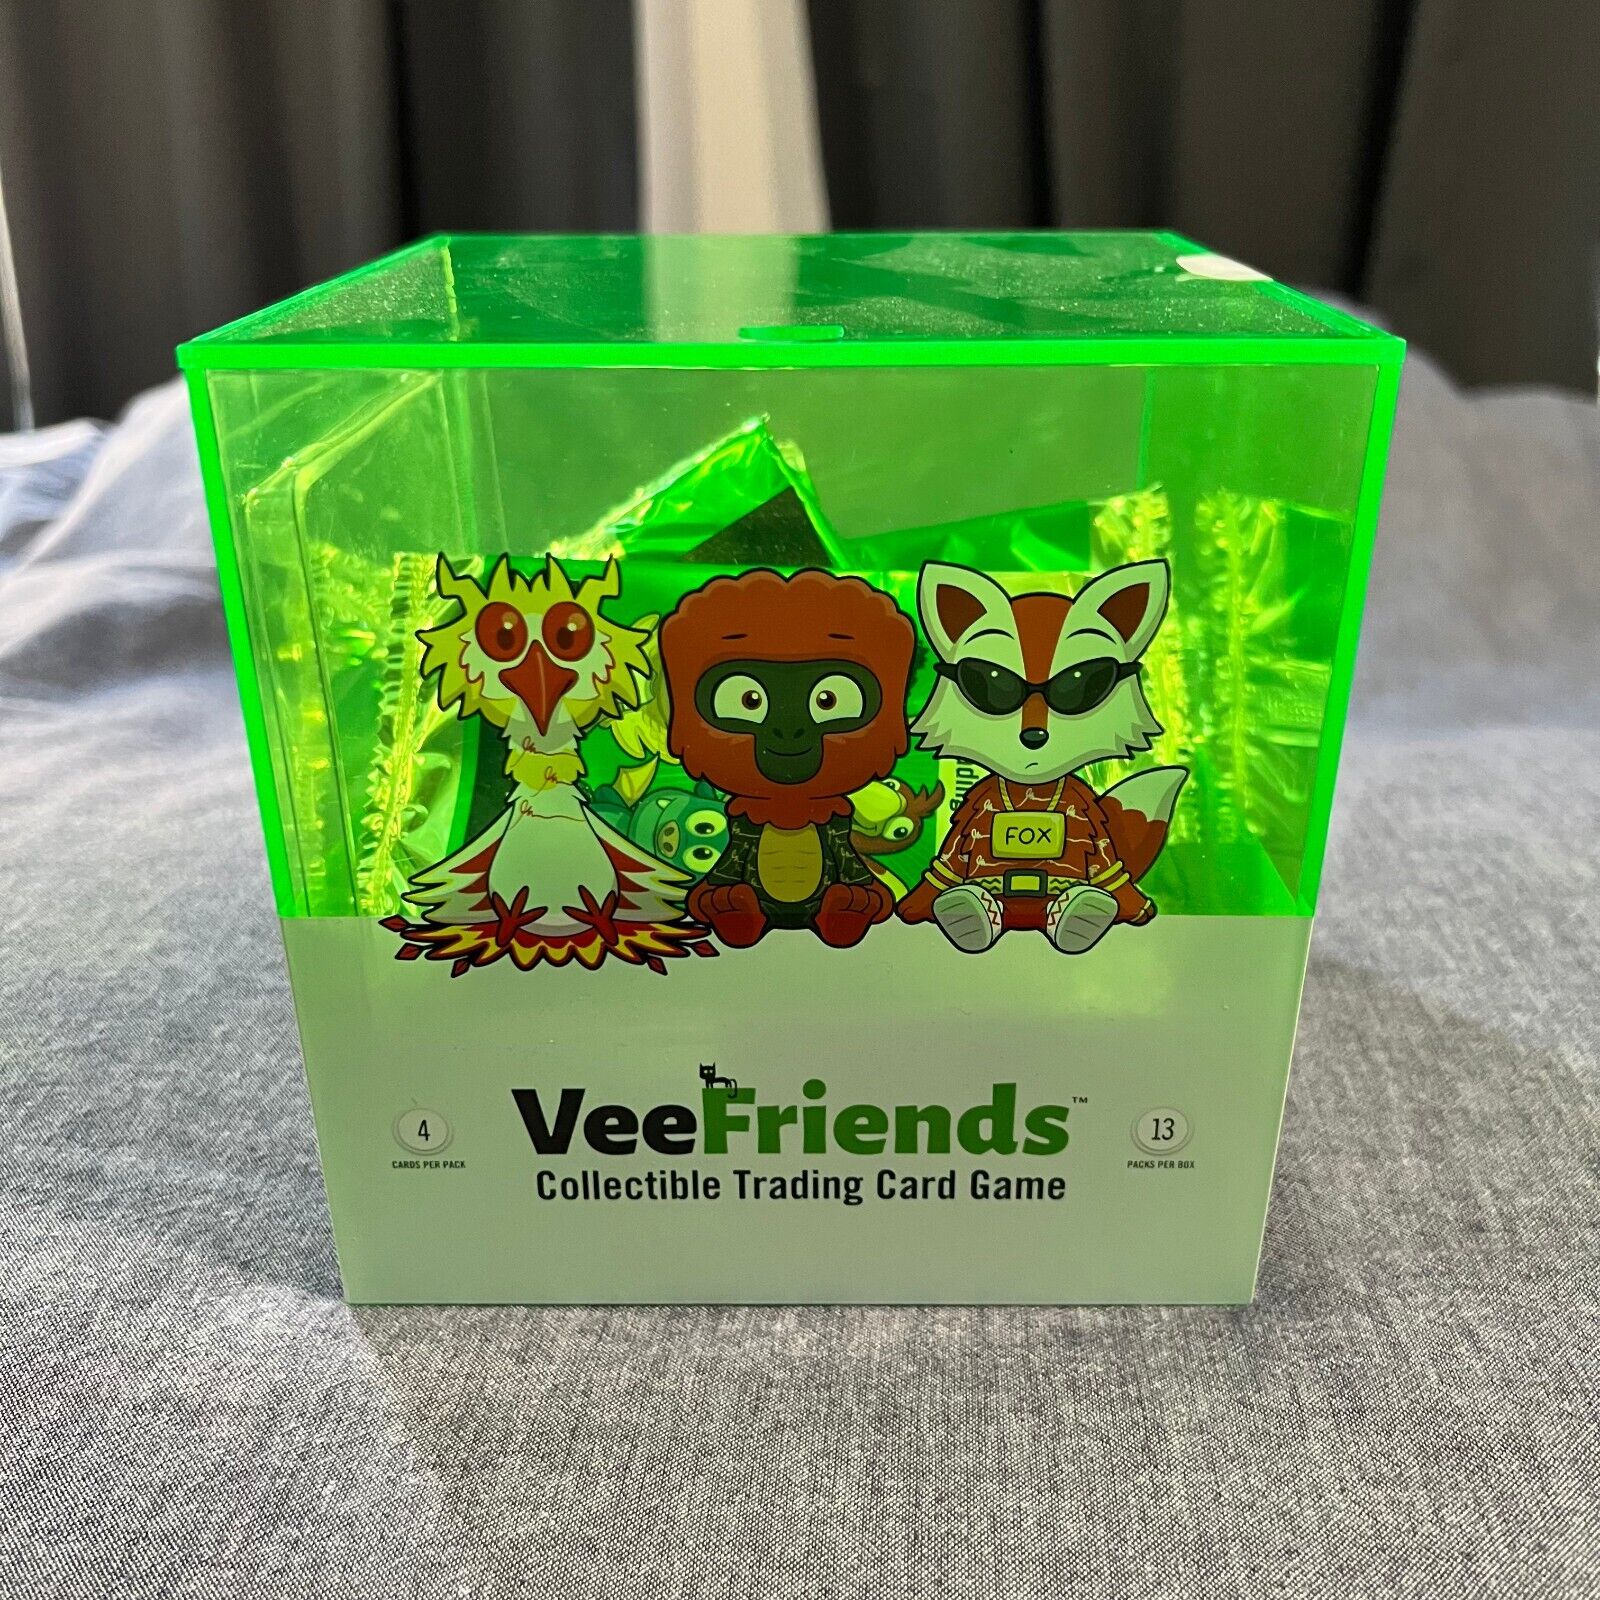 *SEALED* VeeFriends “Compete and Collect” Cards Box Signature Edition -Green